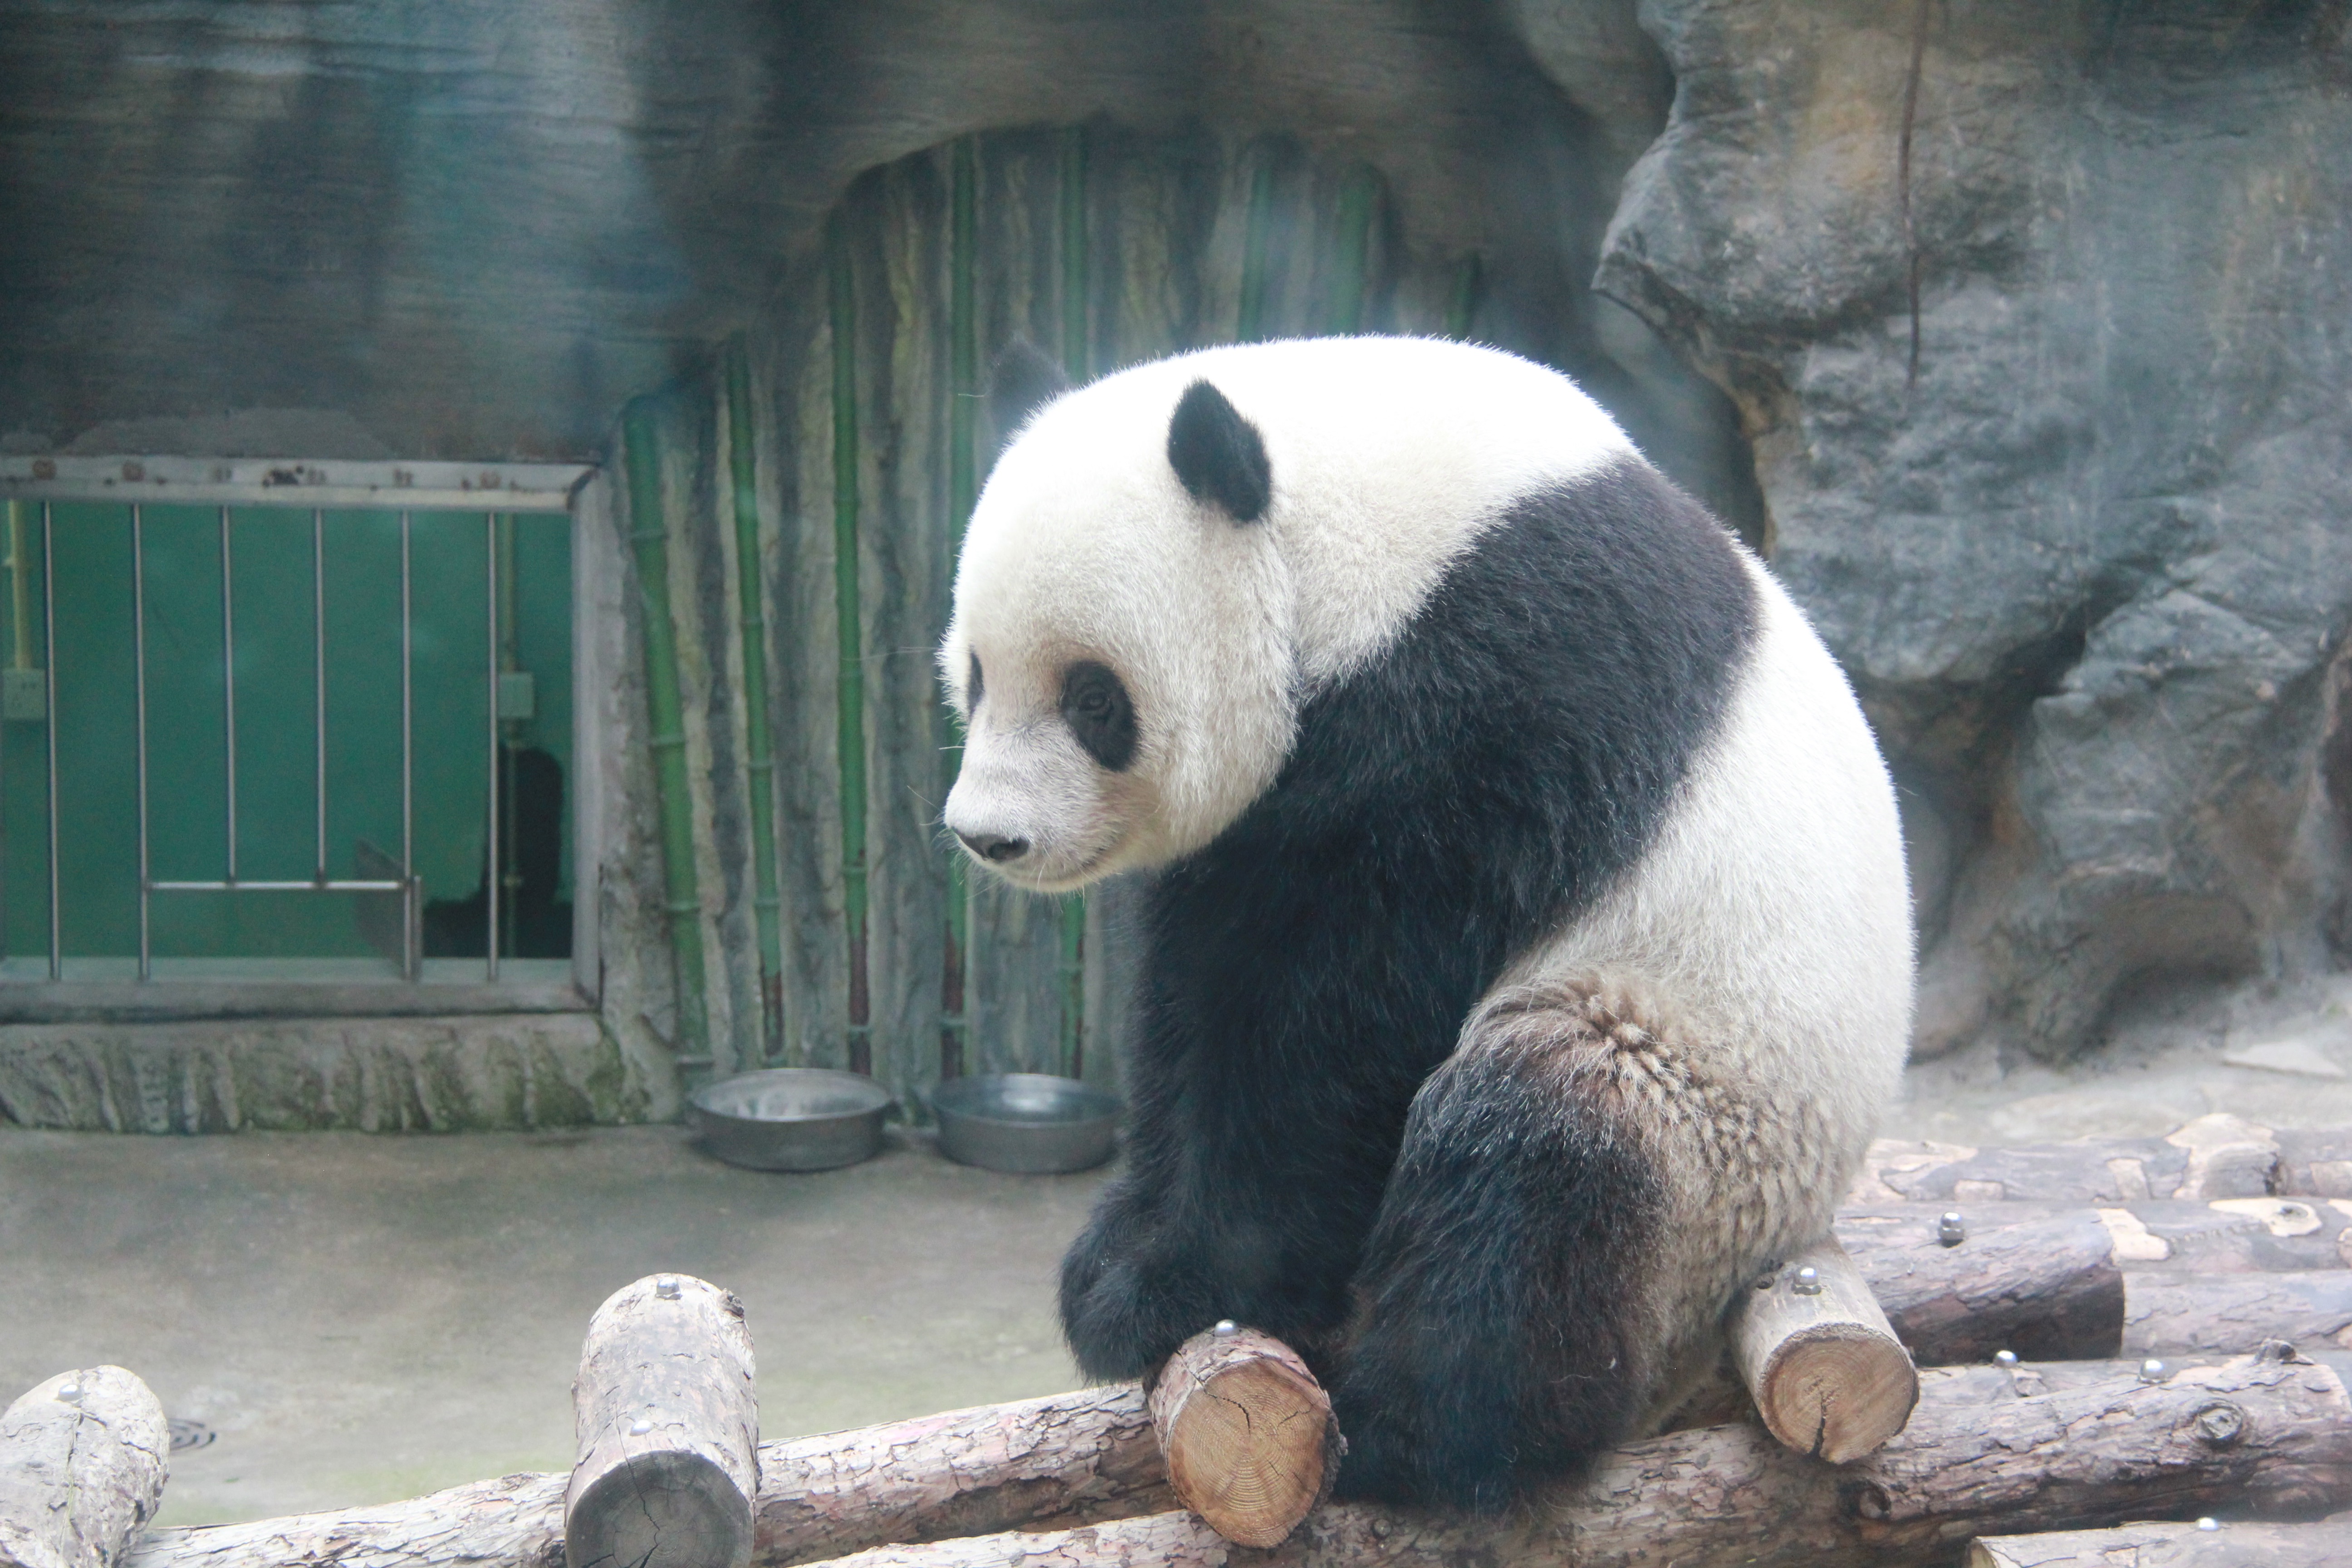 Day 2: Seeing the Giant Panda at the Beijing zoo, China